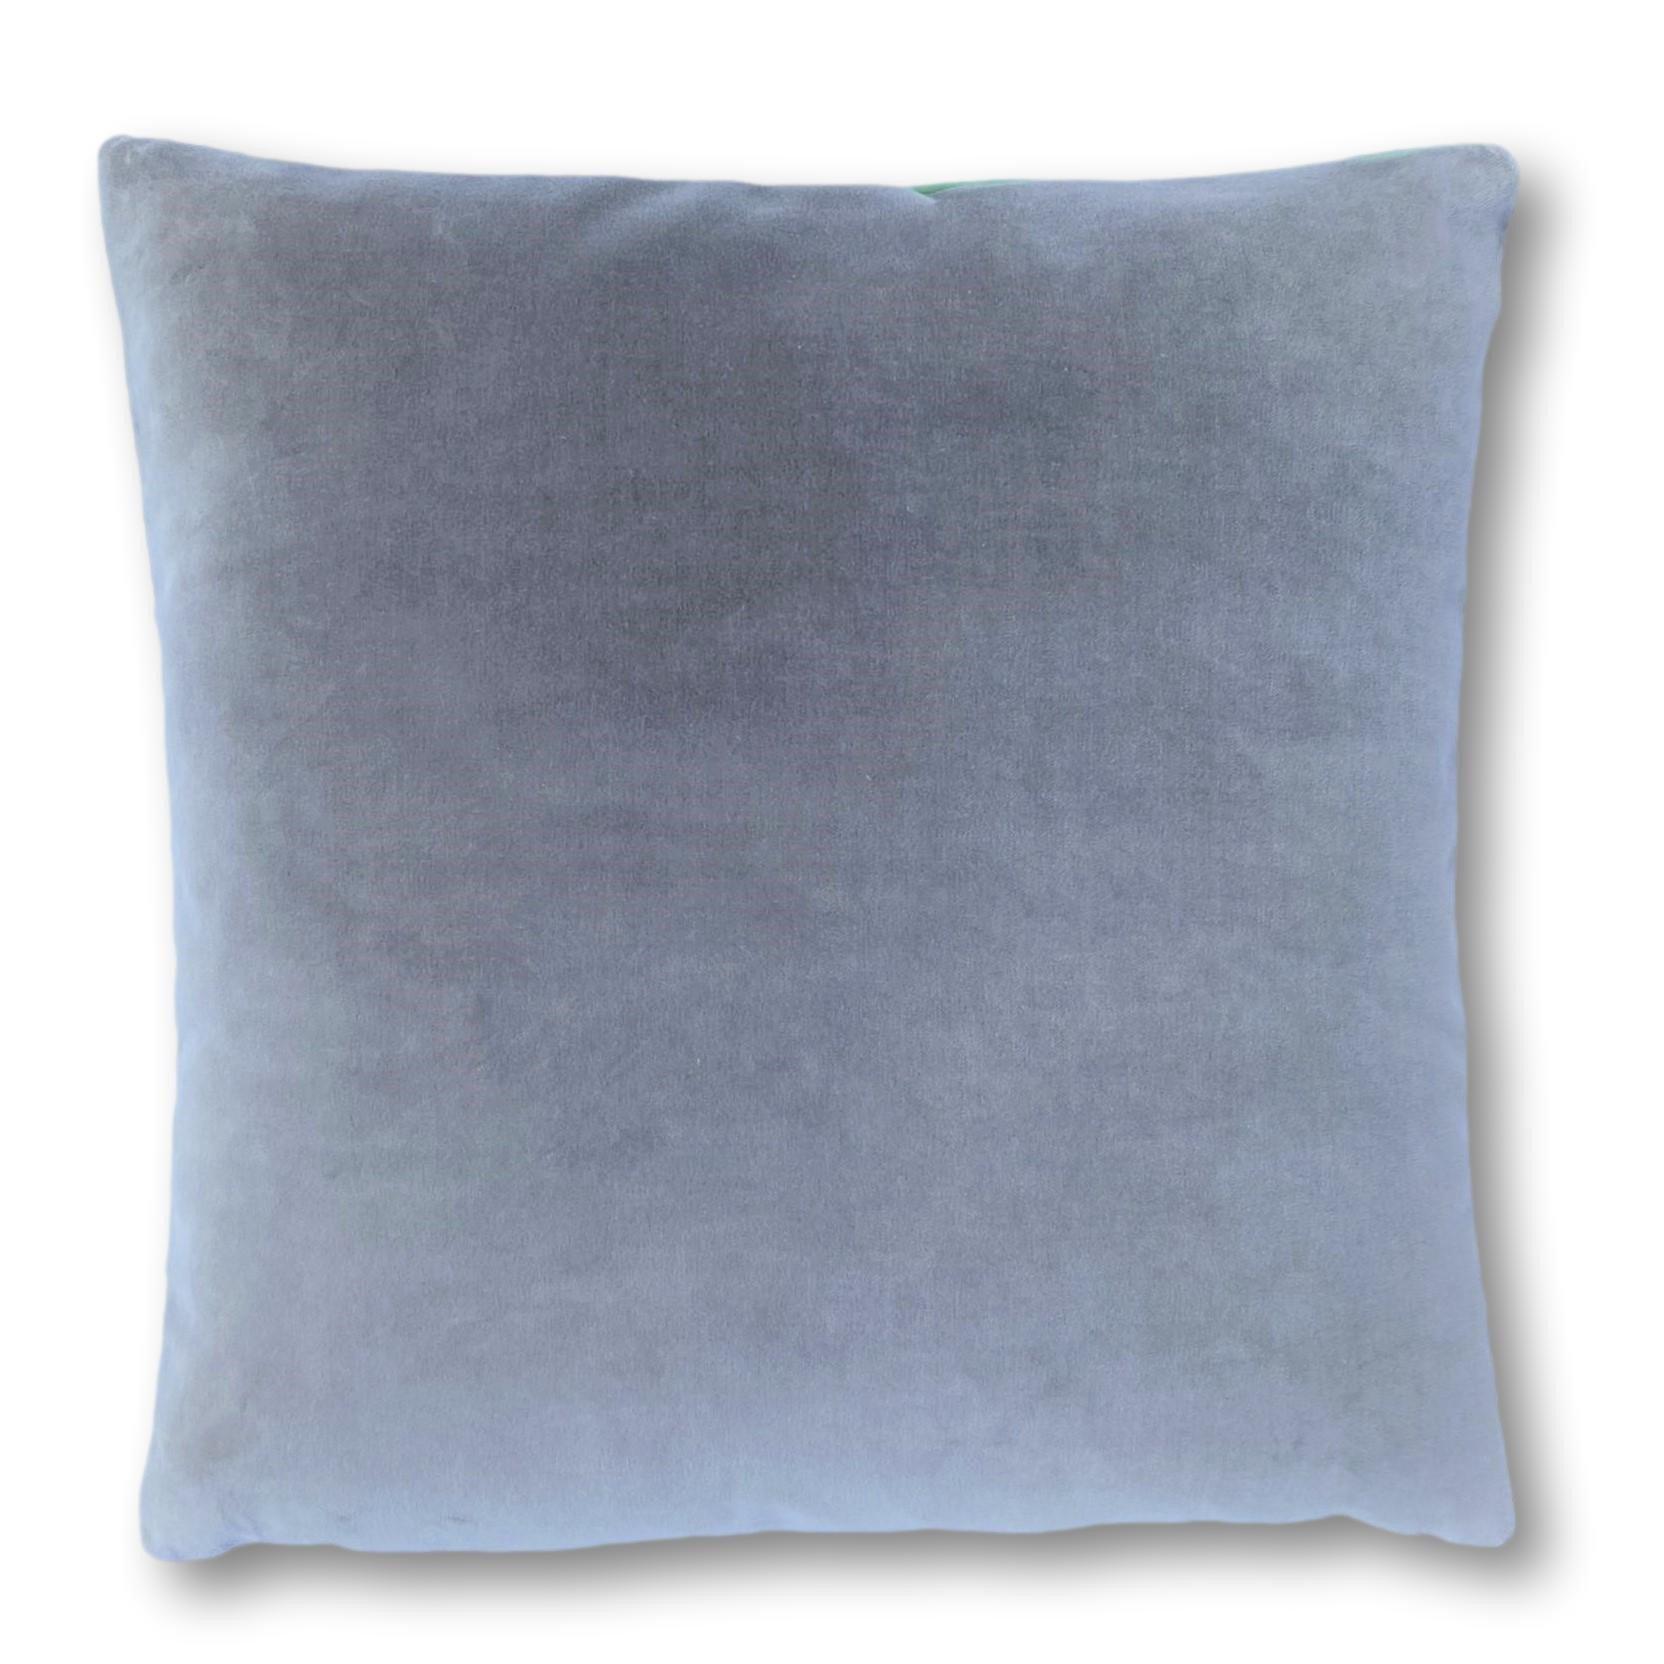 navy and grey cushion covers